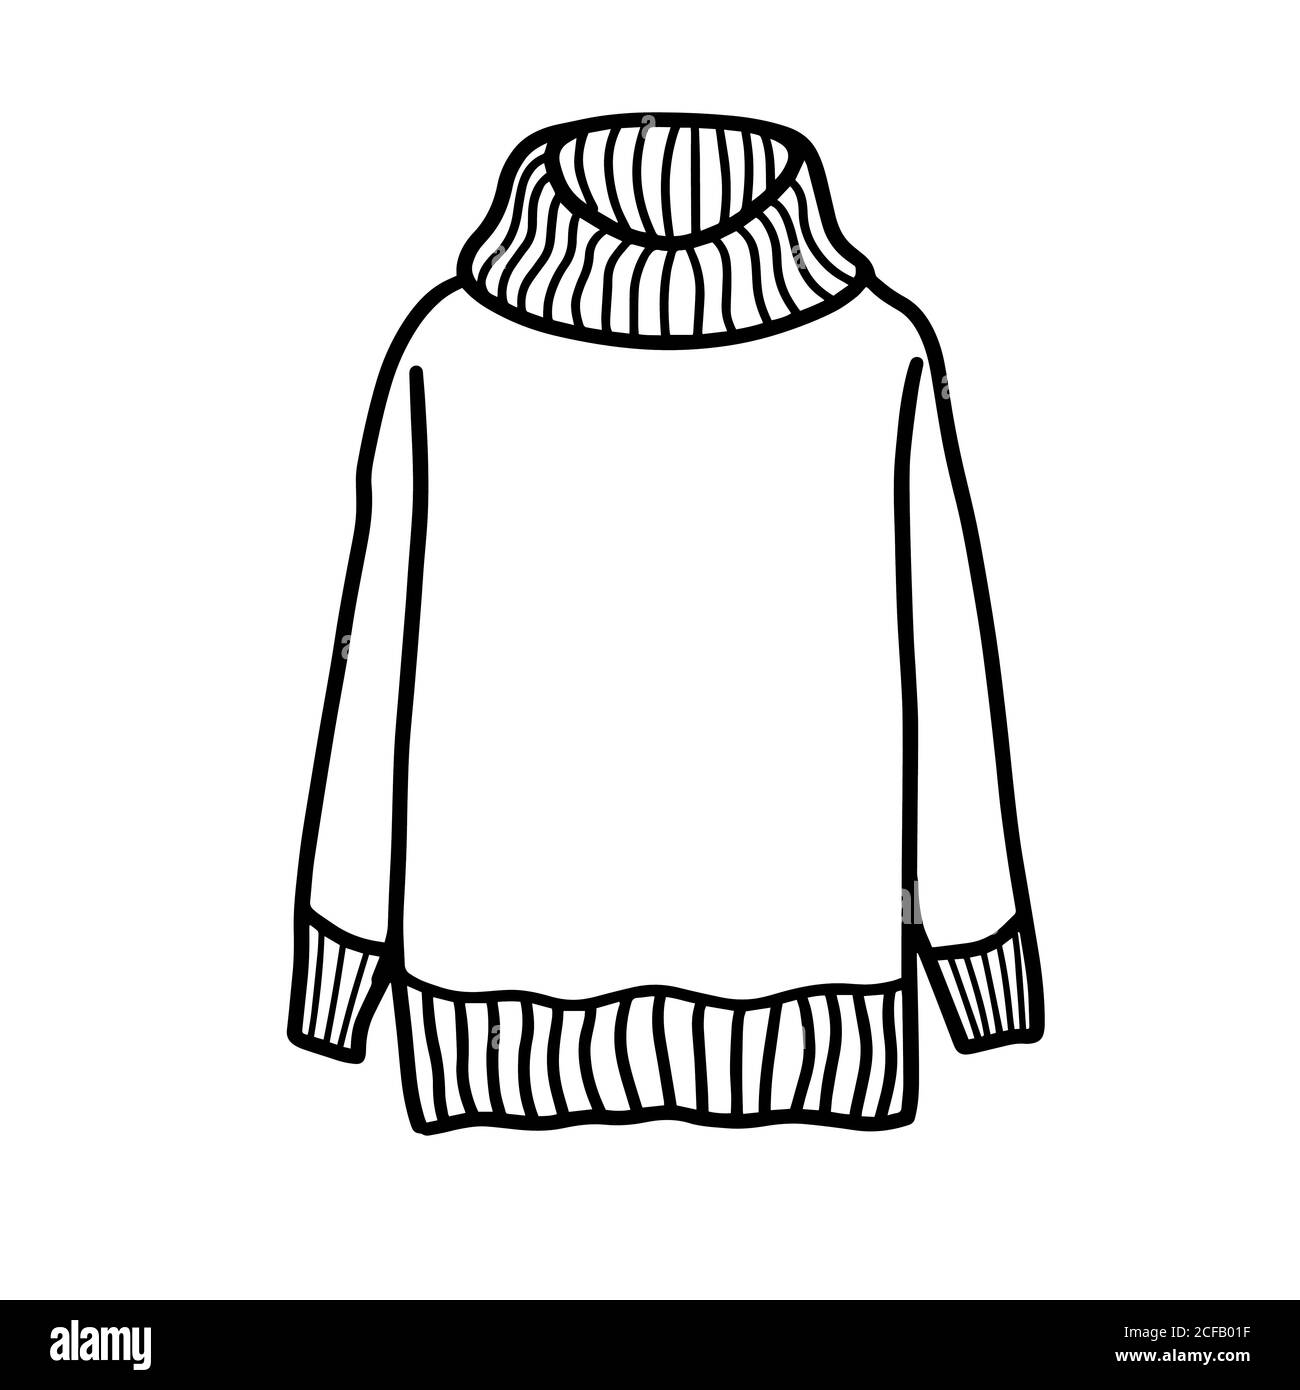 https://c8.alamy.com/comp/2CFB01F/winter-woolen-sweater-warm-cozy-clothes-design-for-postcards-packages-and-printing-hand-drawn-vector-illustration-2CFB01F.jpg